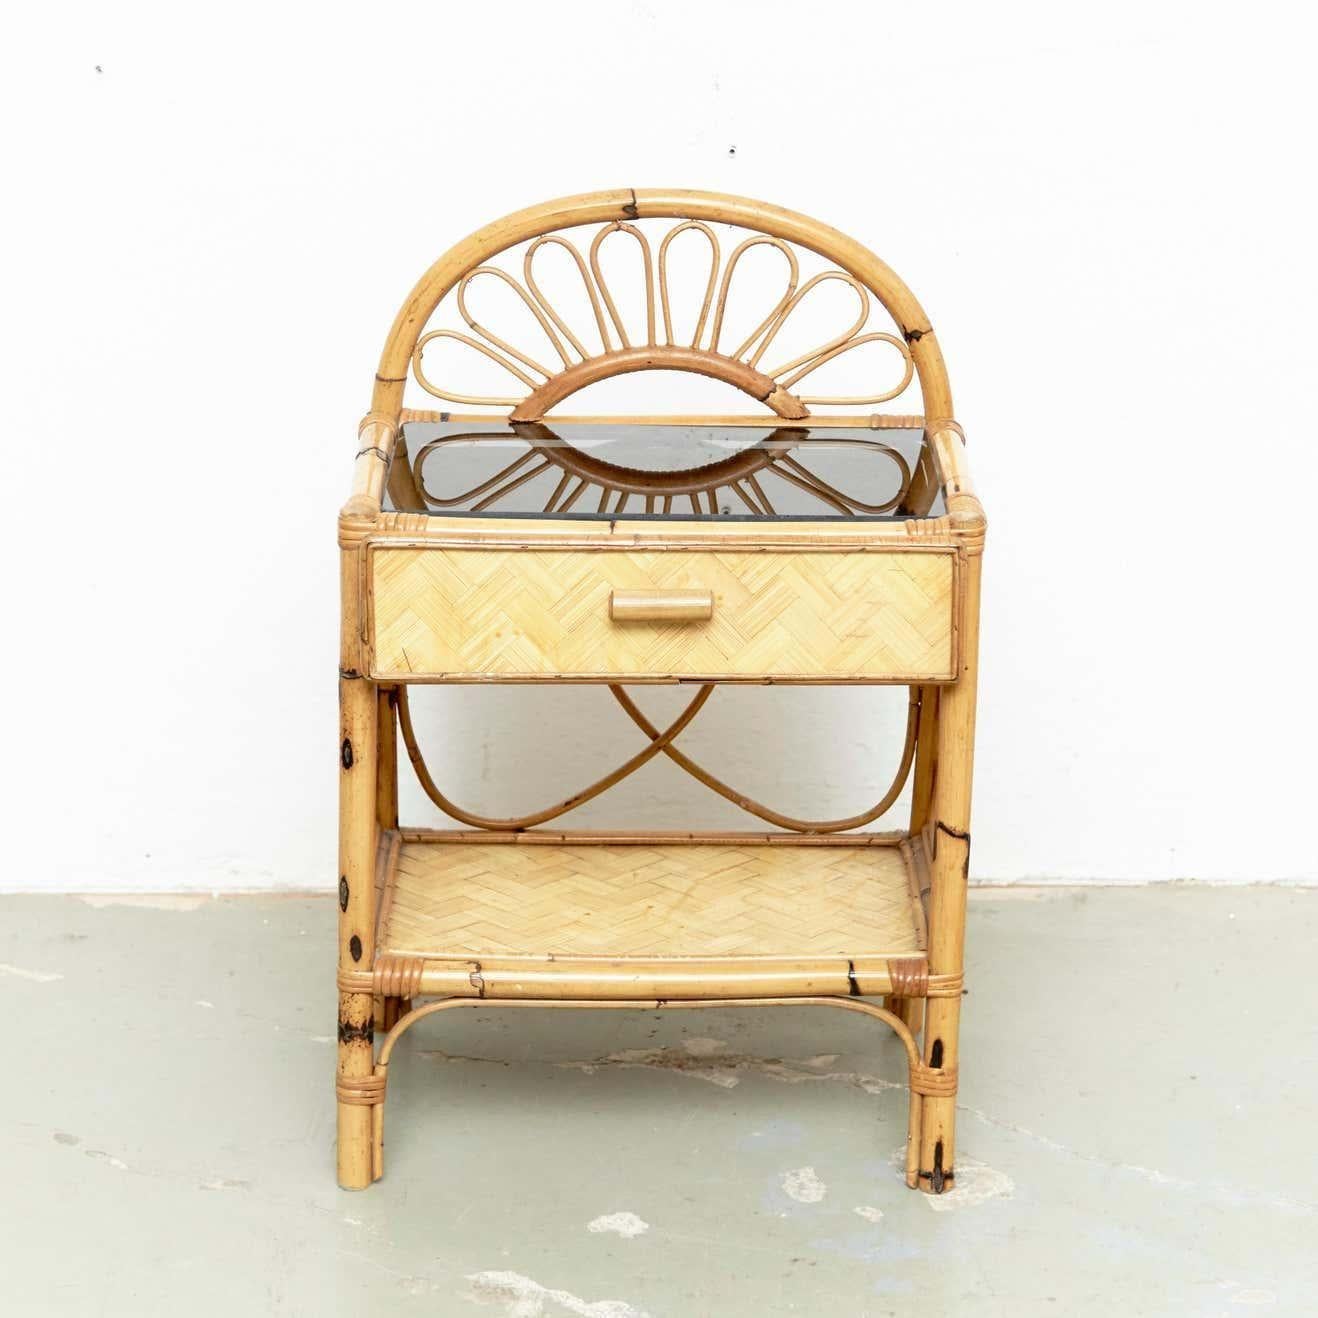 Mid-Century Modern bamboo and rattan side table with glass, circa 1960
Traditionally manufactured in France.
By unknown designer.

In original condition with minor wear consistent of age and use, preserving a beautiful patina.